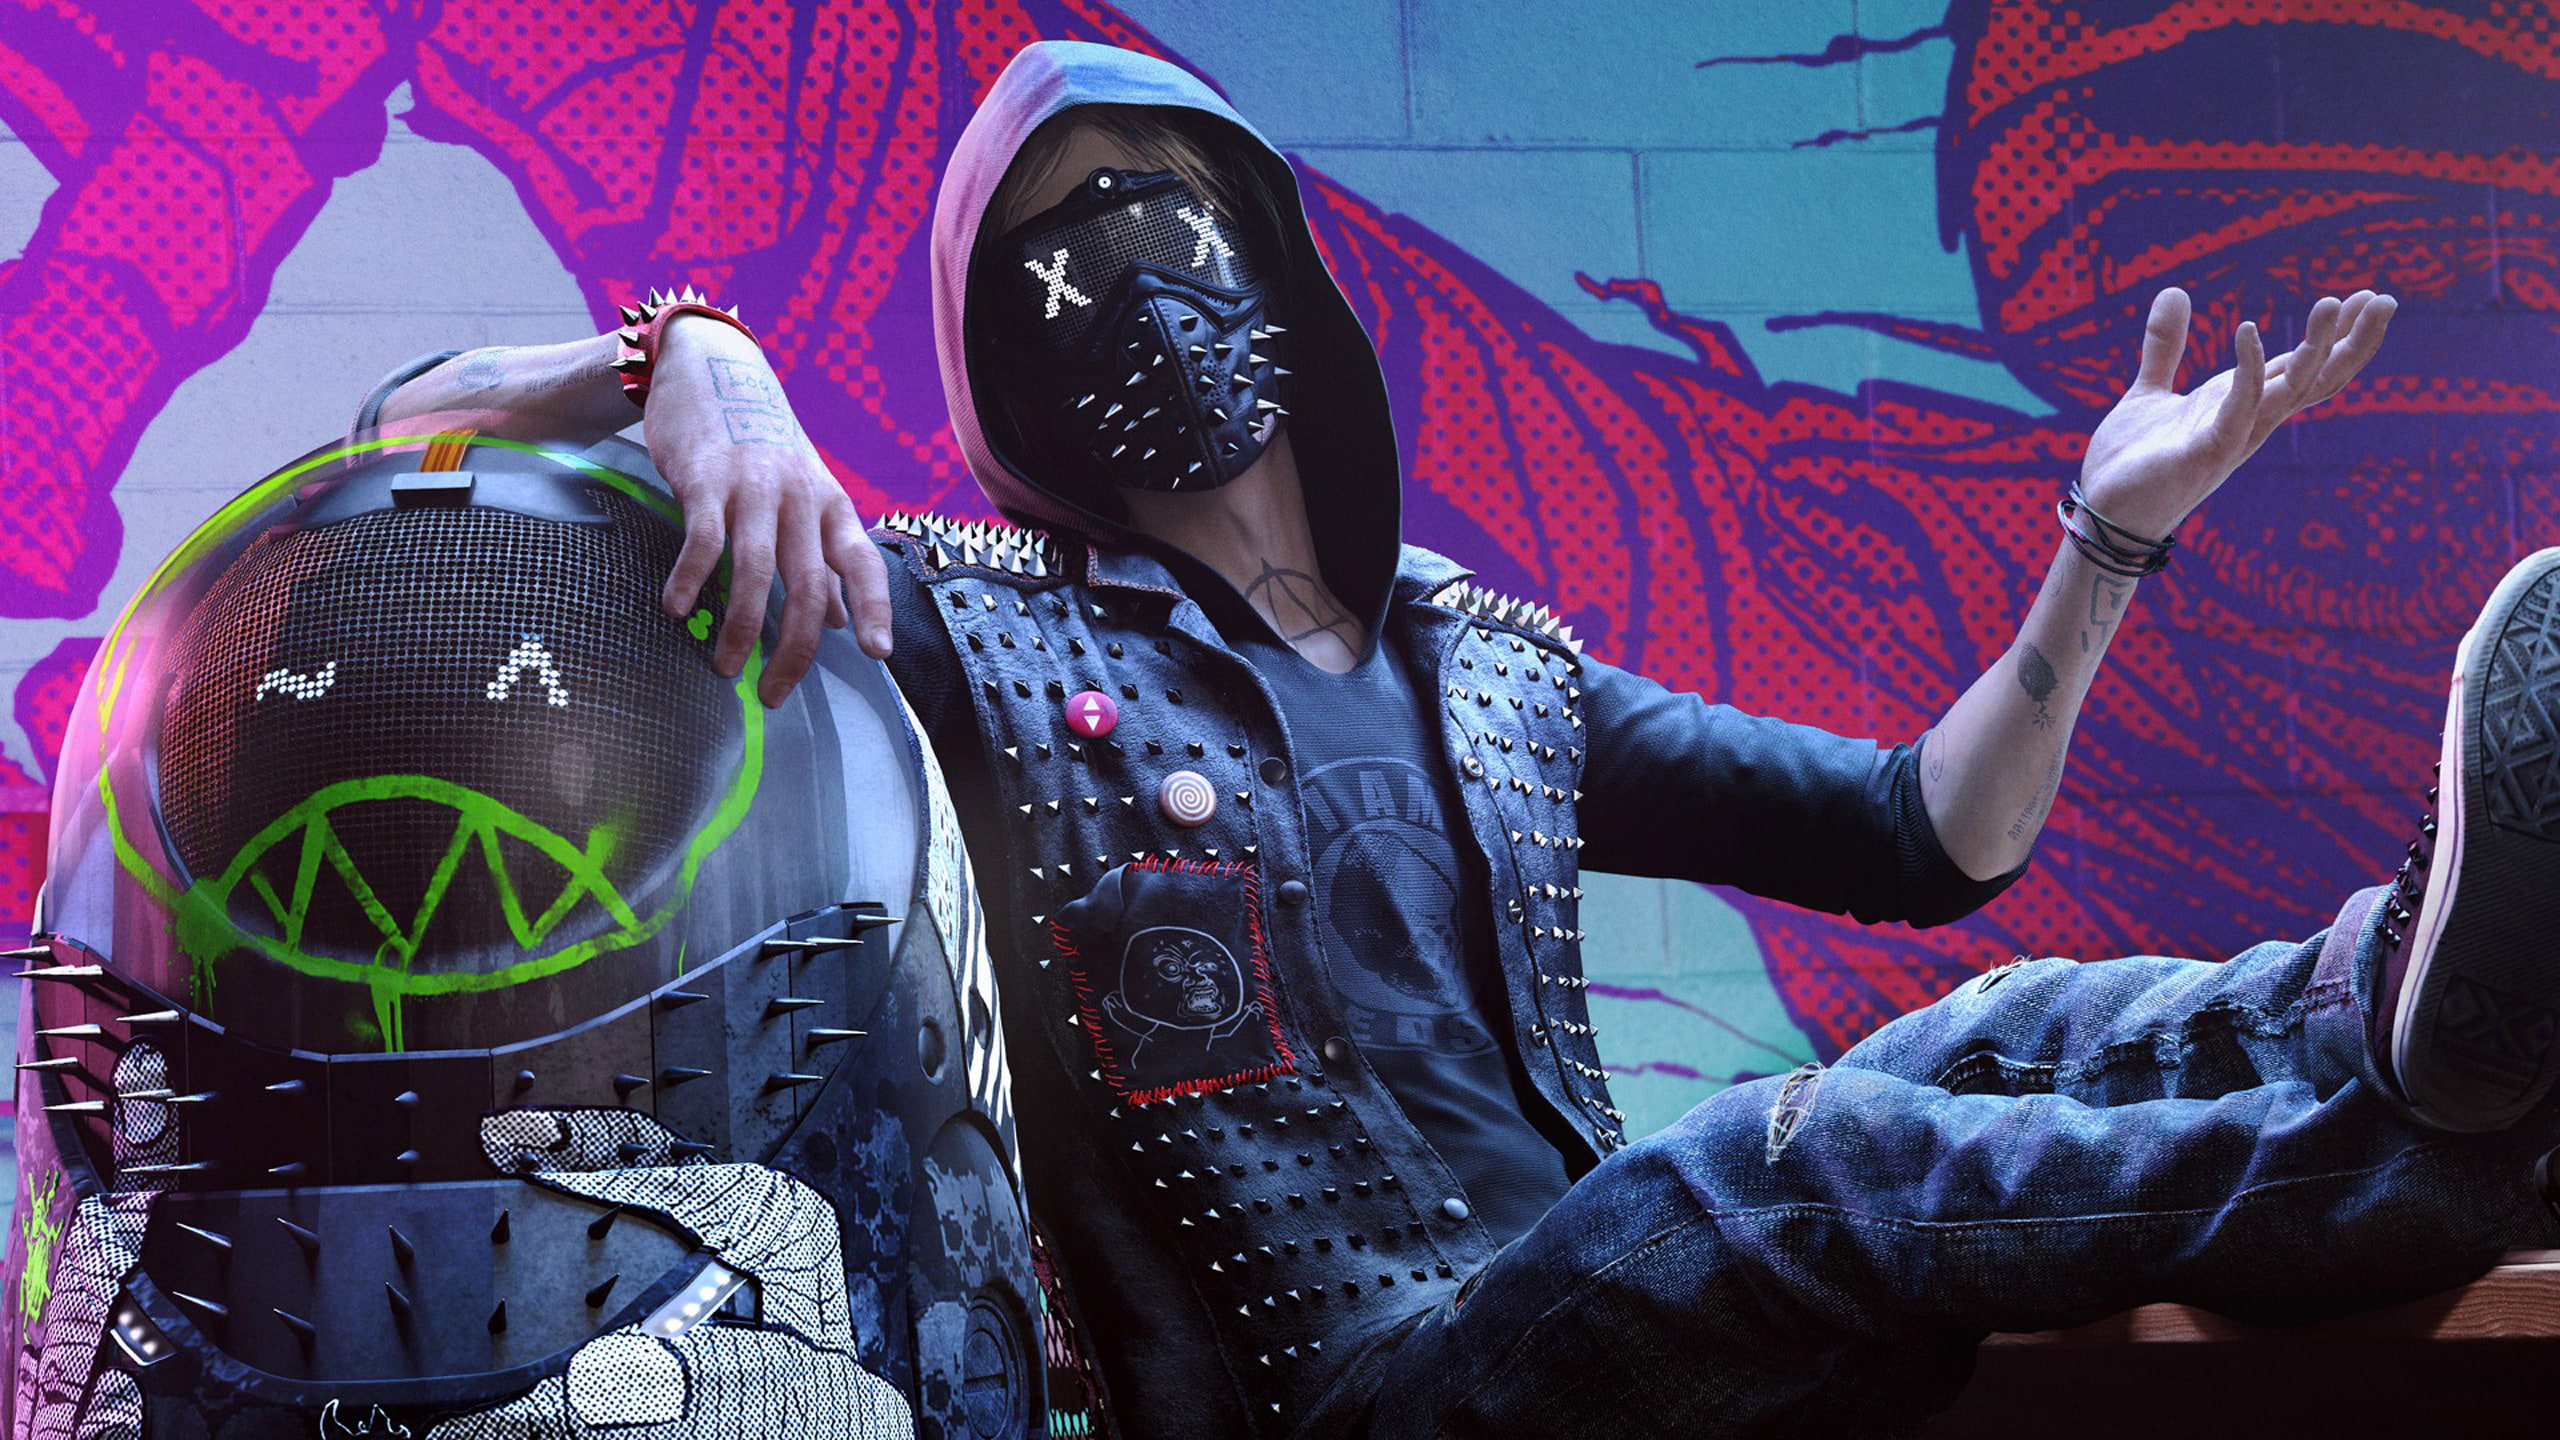 how to download watch dogs 2 for free october